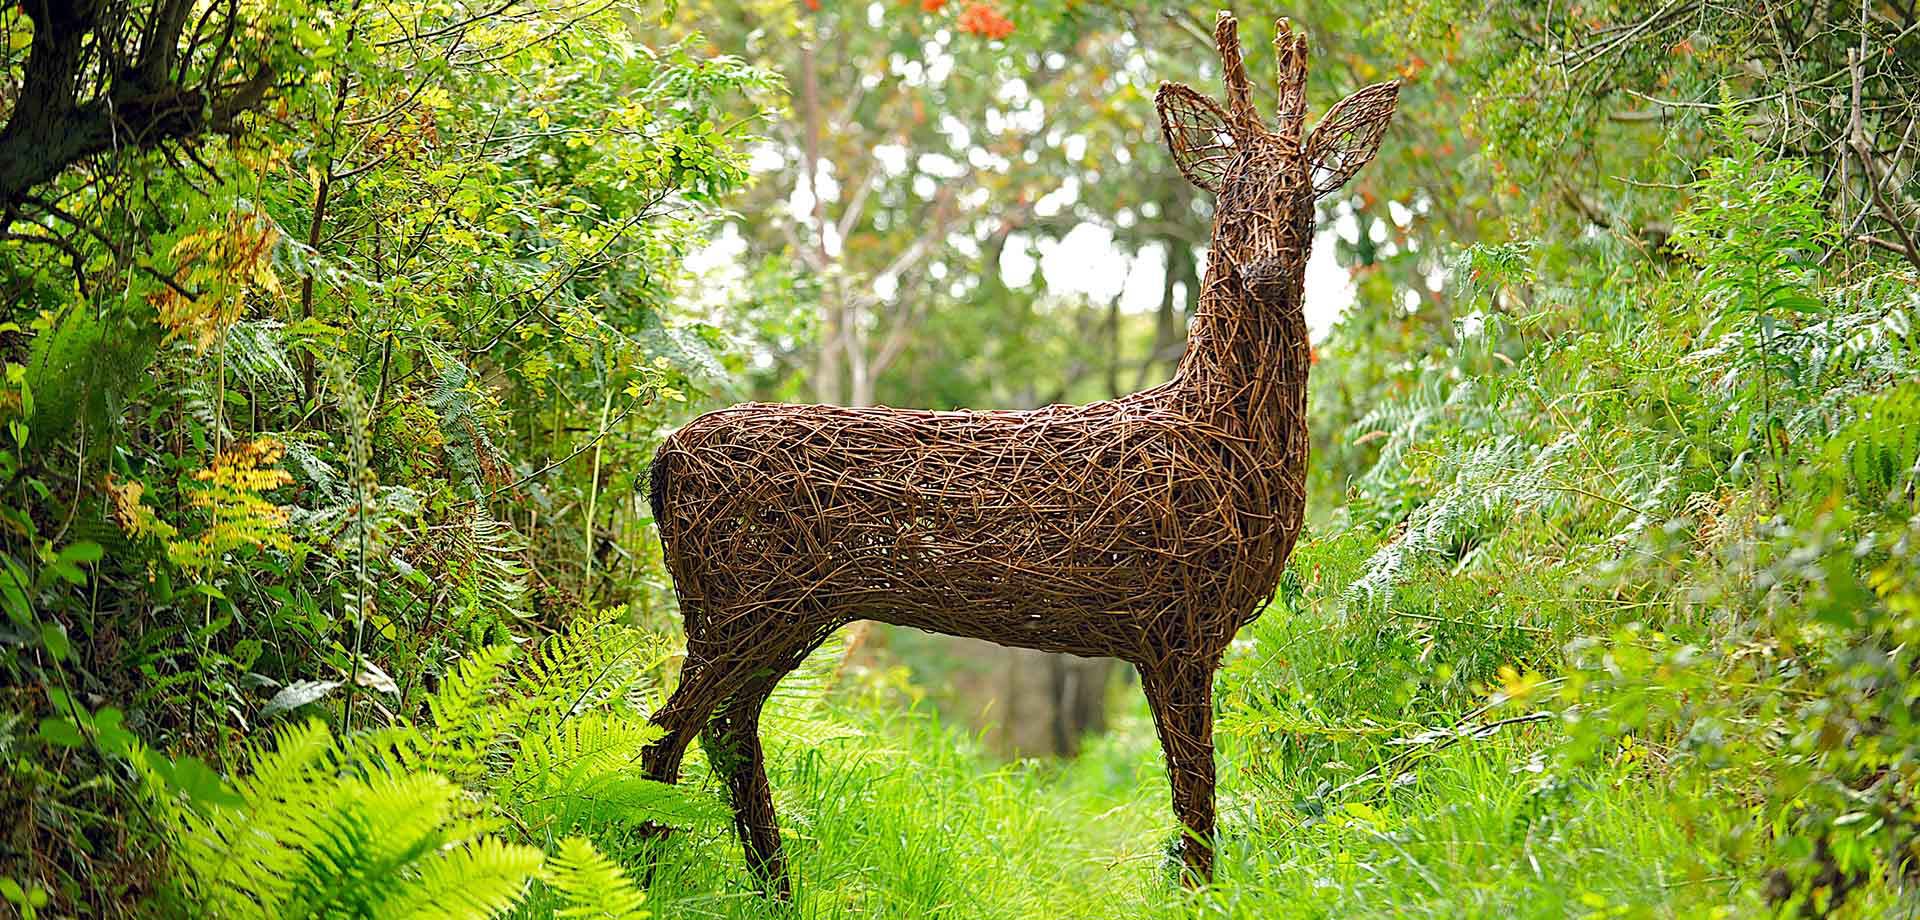 Nordic stag willow weaving